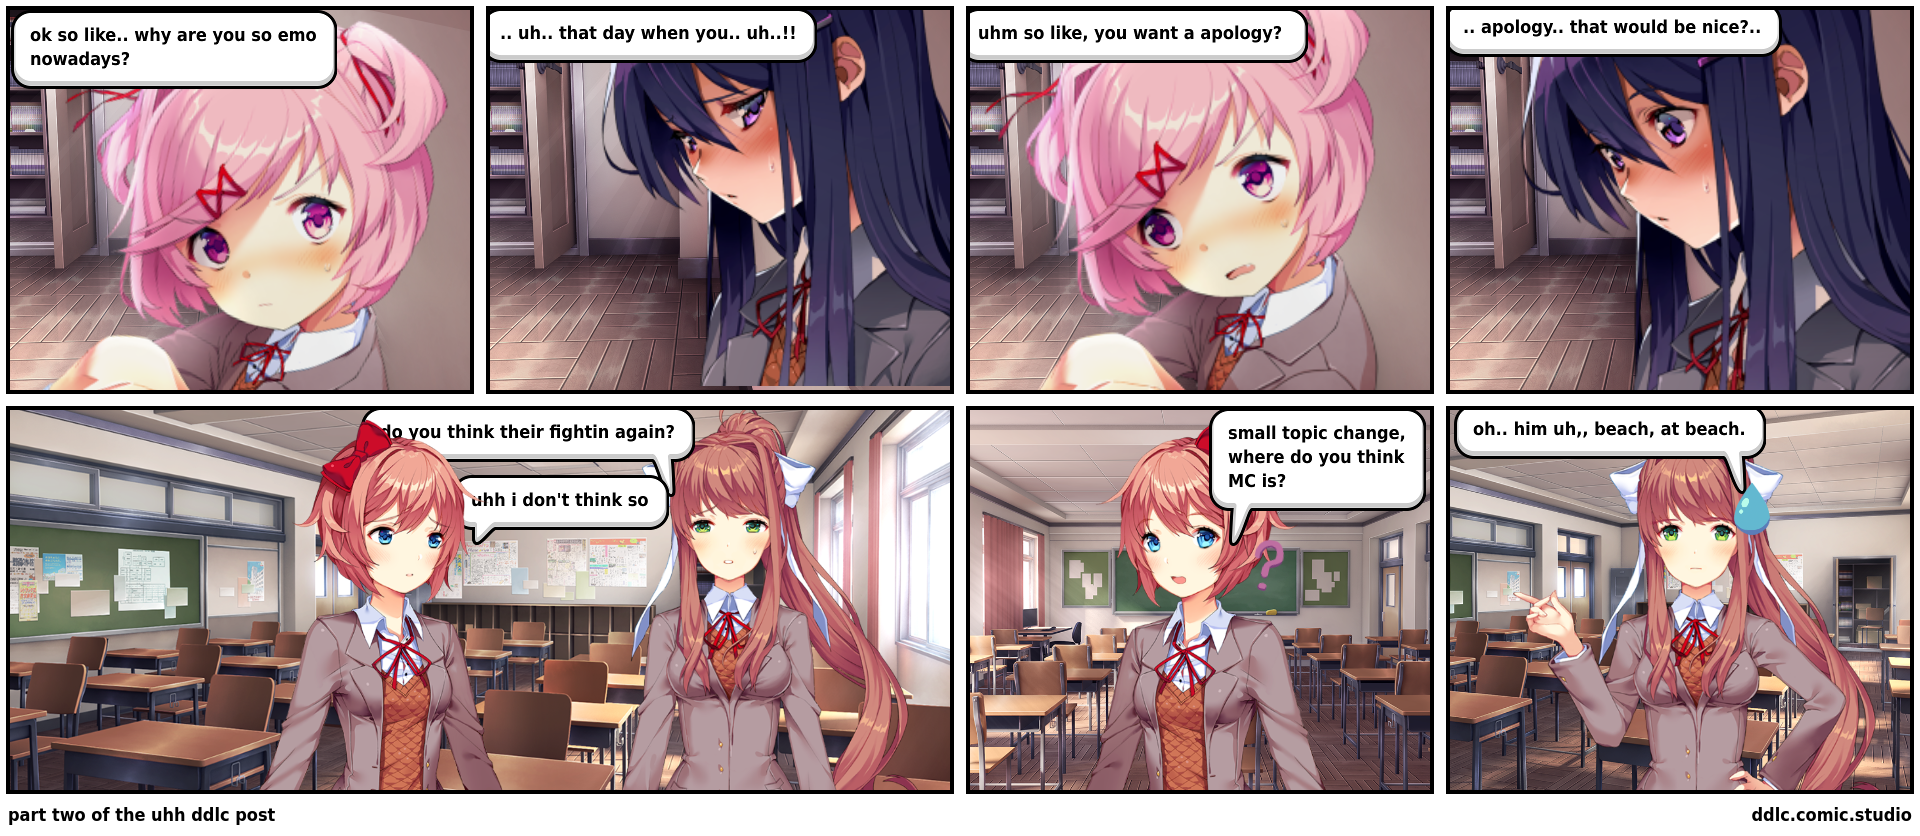 part two of the uhh ddlc post 